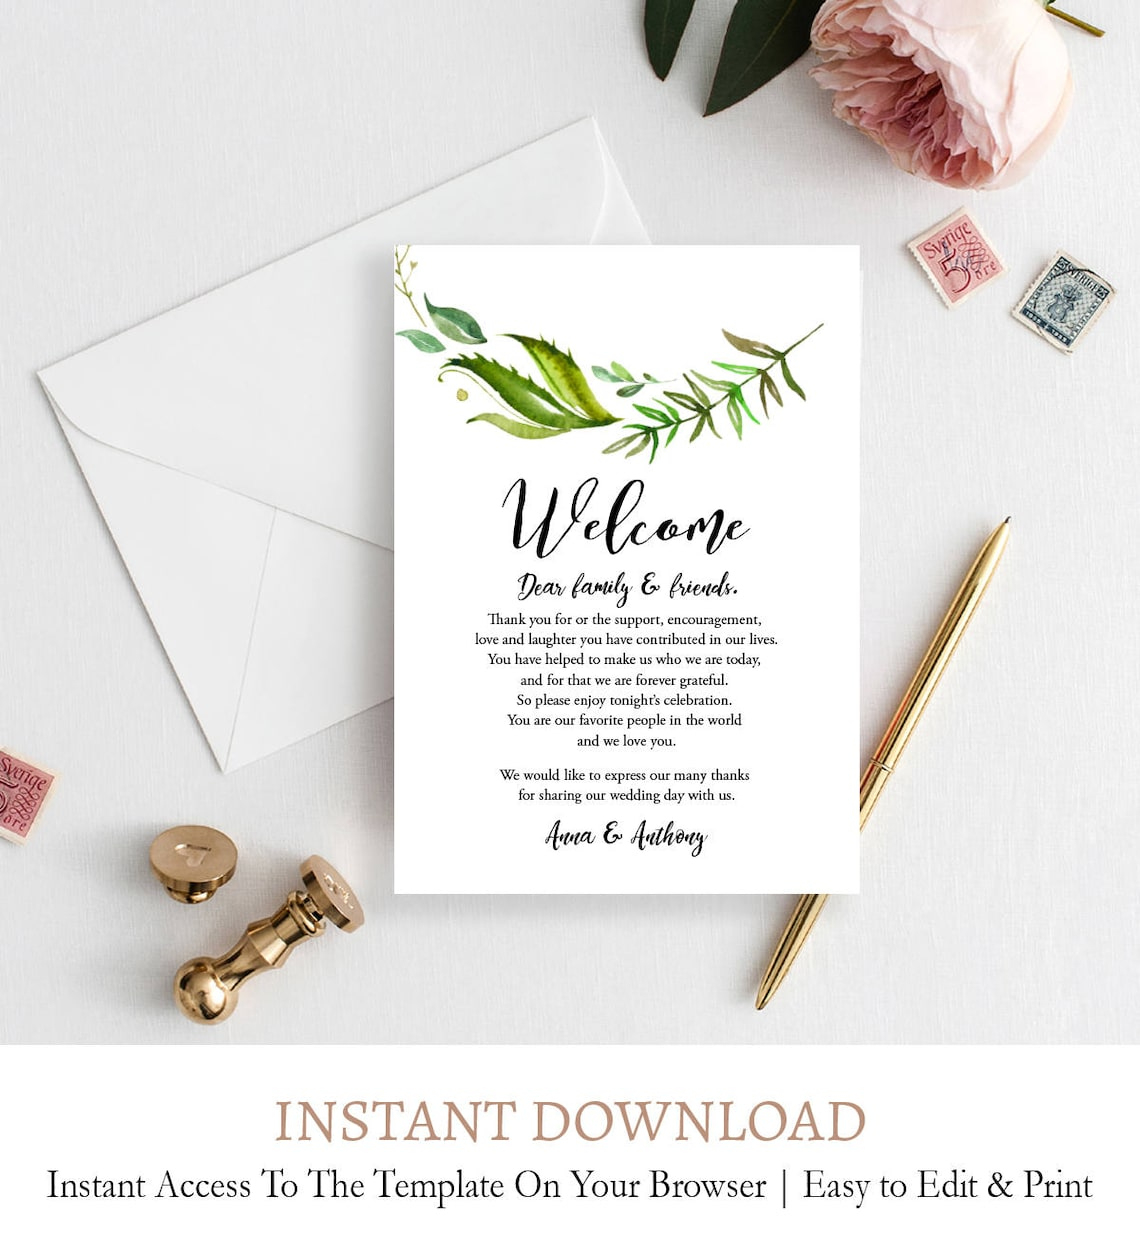 Wedding Weekend Itinerary Template Welcome Bag Tag Note | Etsy inside Wedding Welcome Bag Itinerary Template